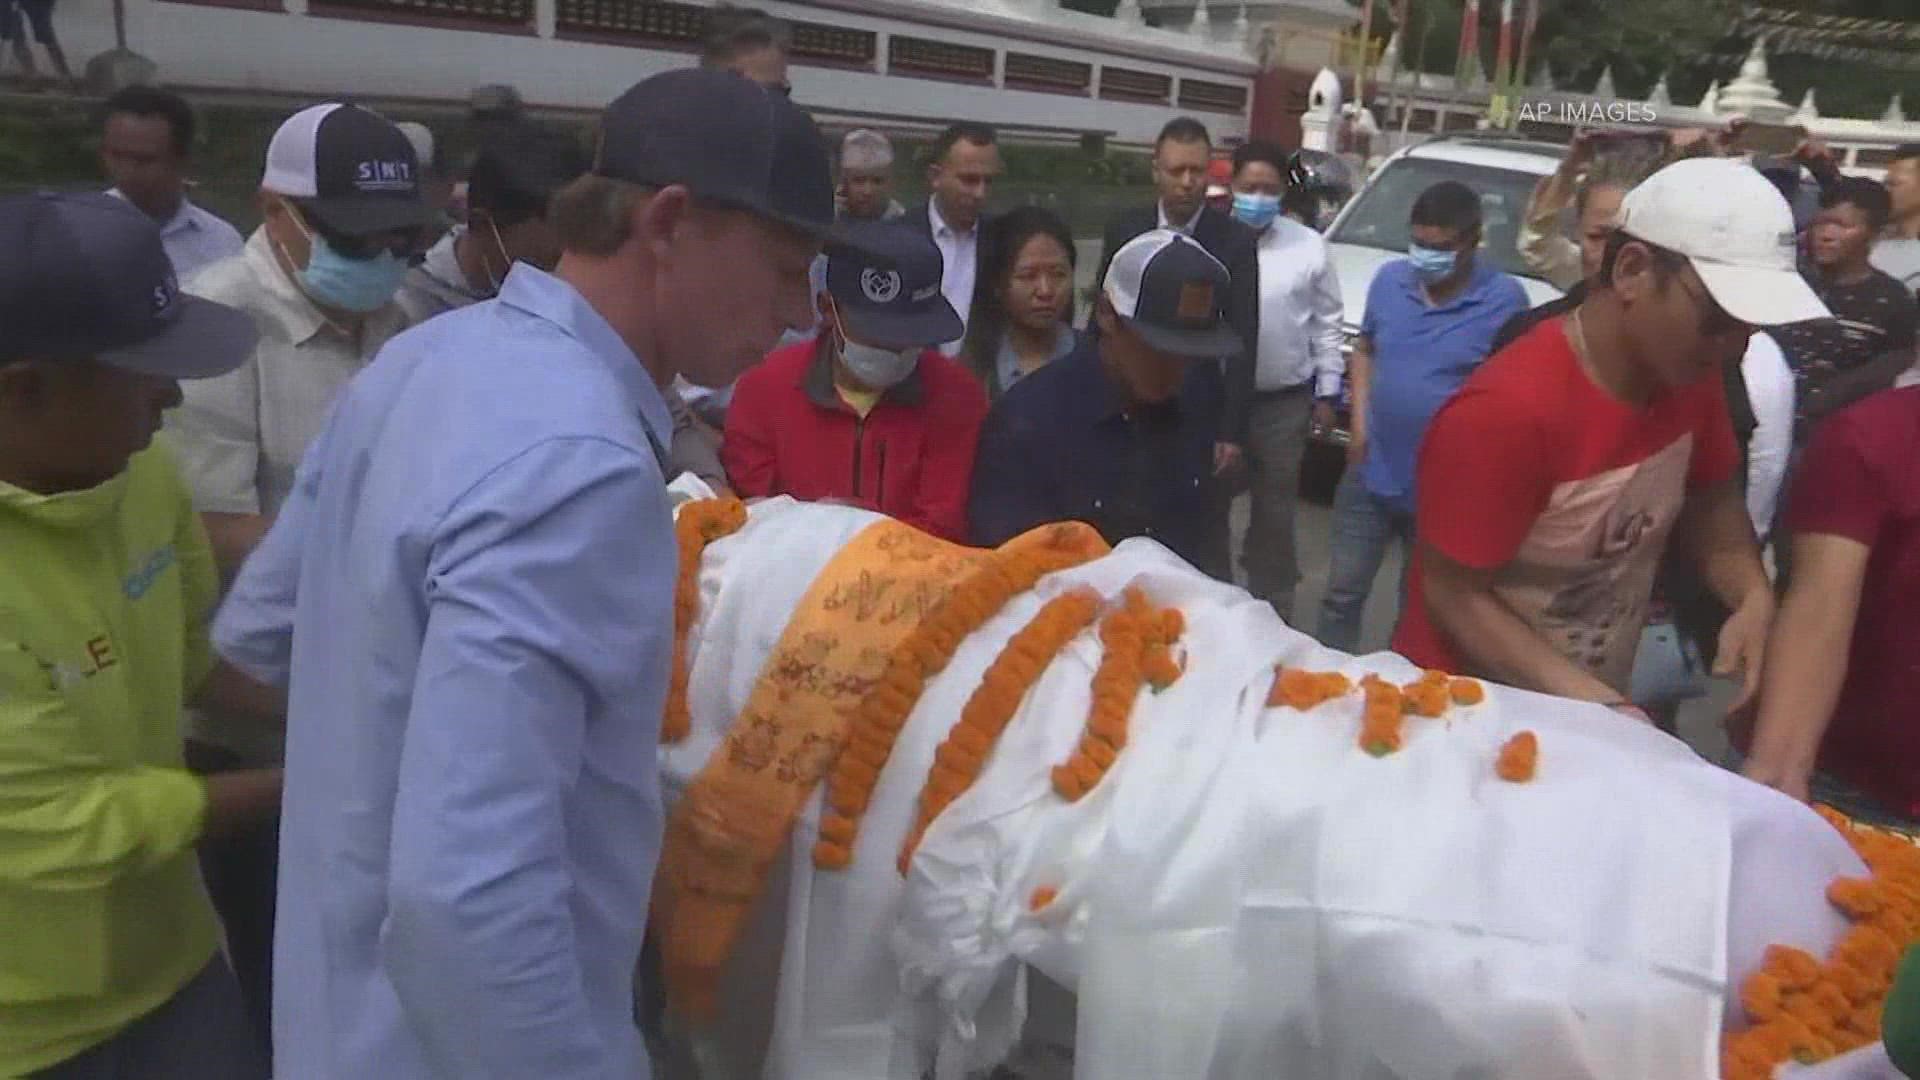 Hilaree Nelson, a professional skier from Telluride who died on one of the world's tallest peaks, was laid to rest in a traditional funeral in the Himalayas.